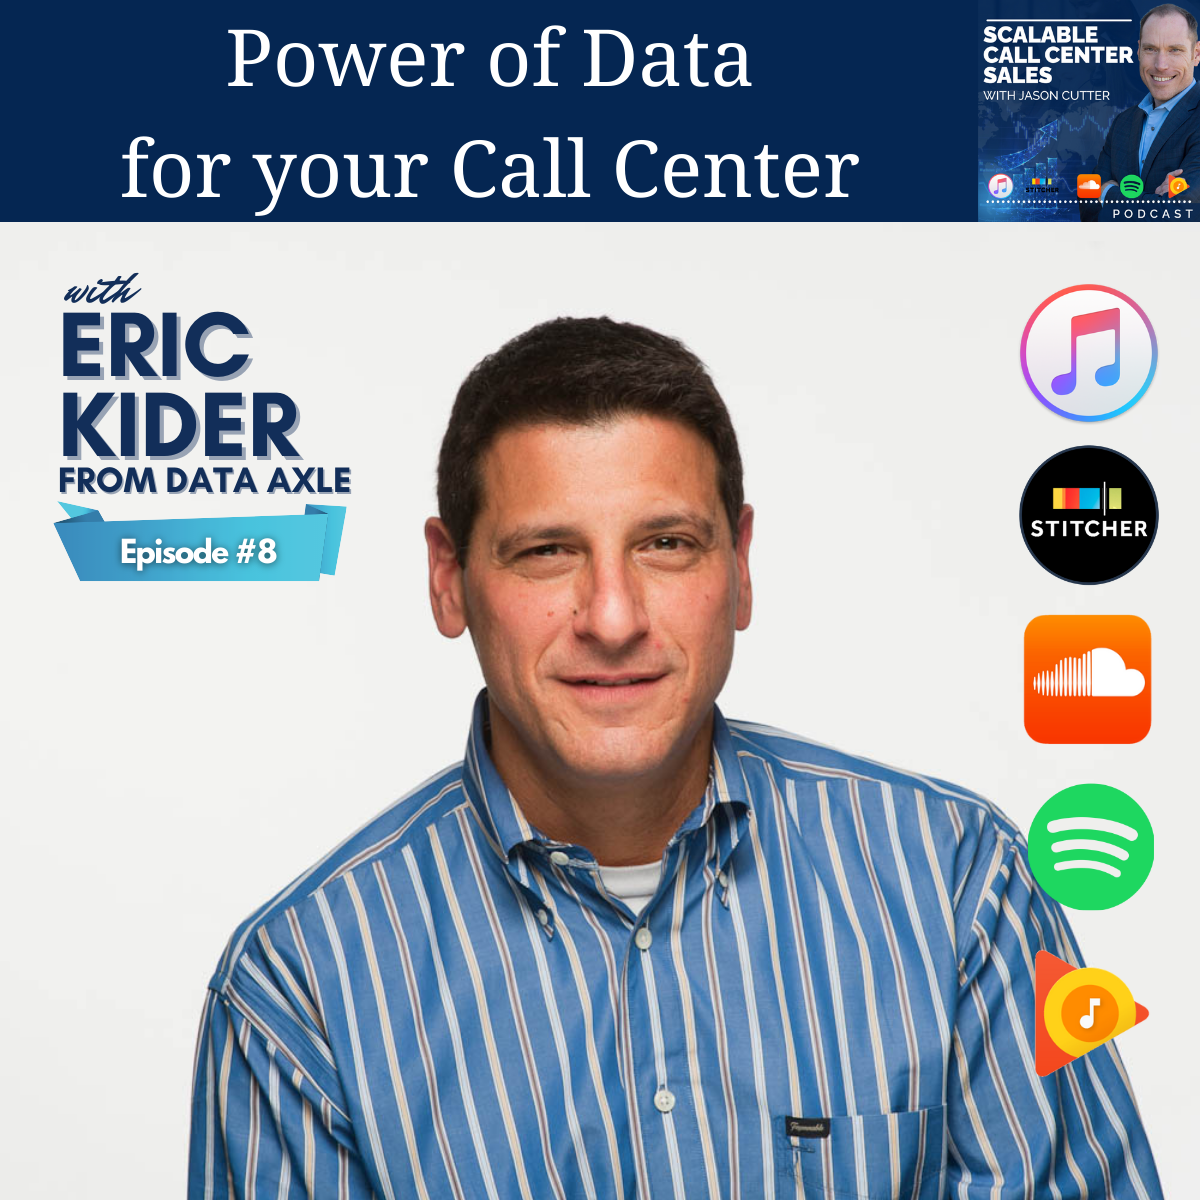 [008] Power of Data for your Call Center, with Eric Kider from Data Axle